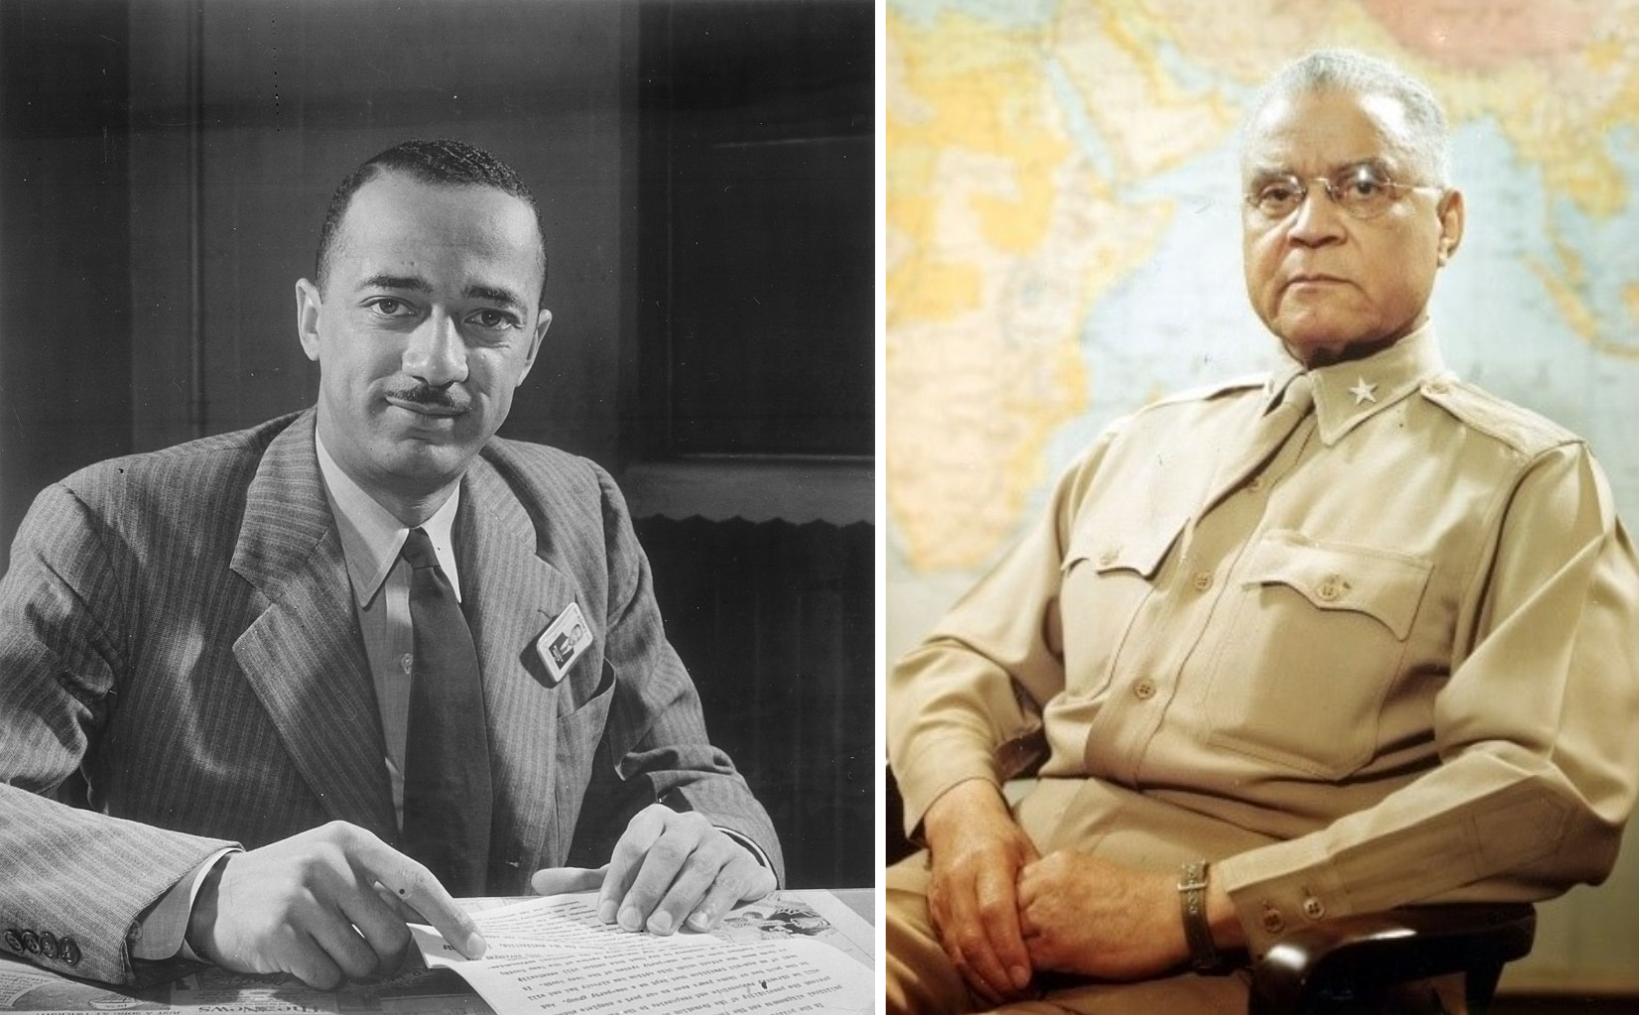 William H. Hastie pictured here was an African American lawyer who served as the Civilian Aide to the Secretary of War (left). Official U.S. Army photo of Benjamin O. Davis Sr. as a brigadier general, 1945 (right).